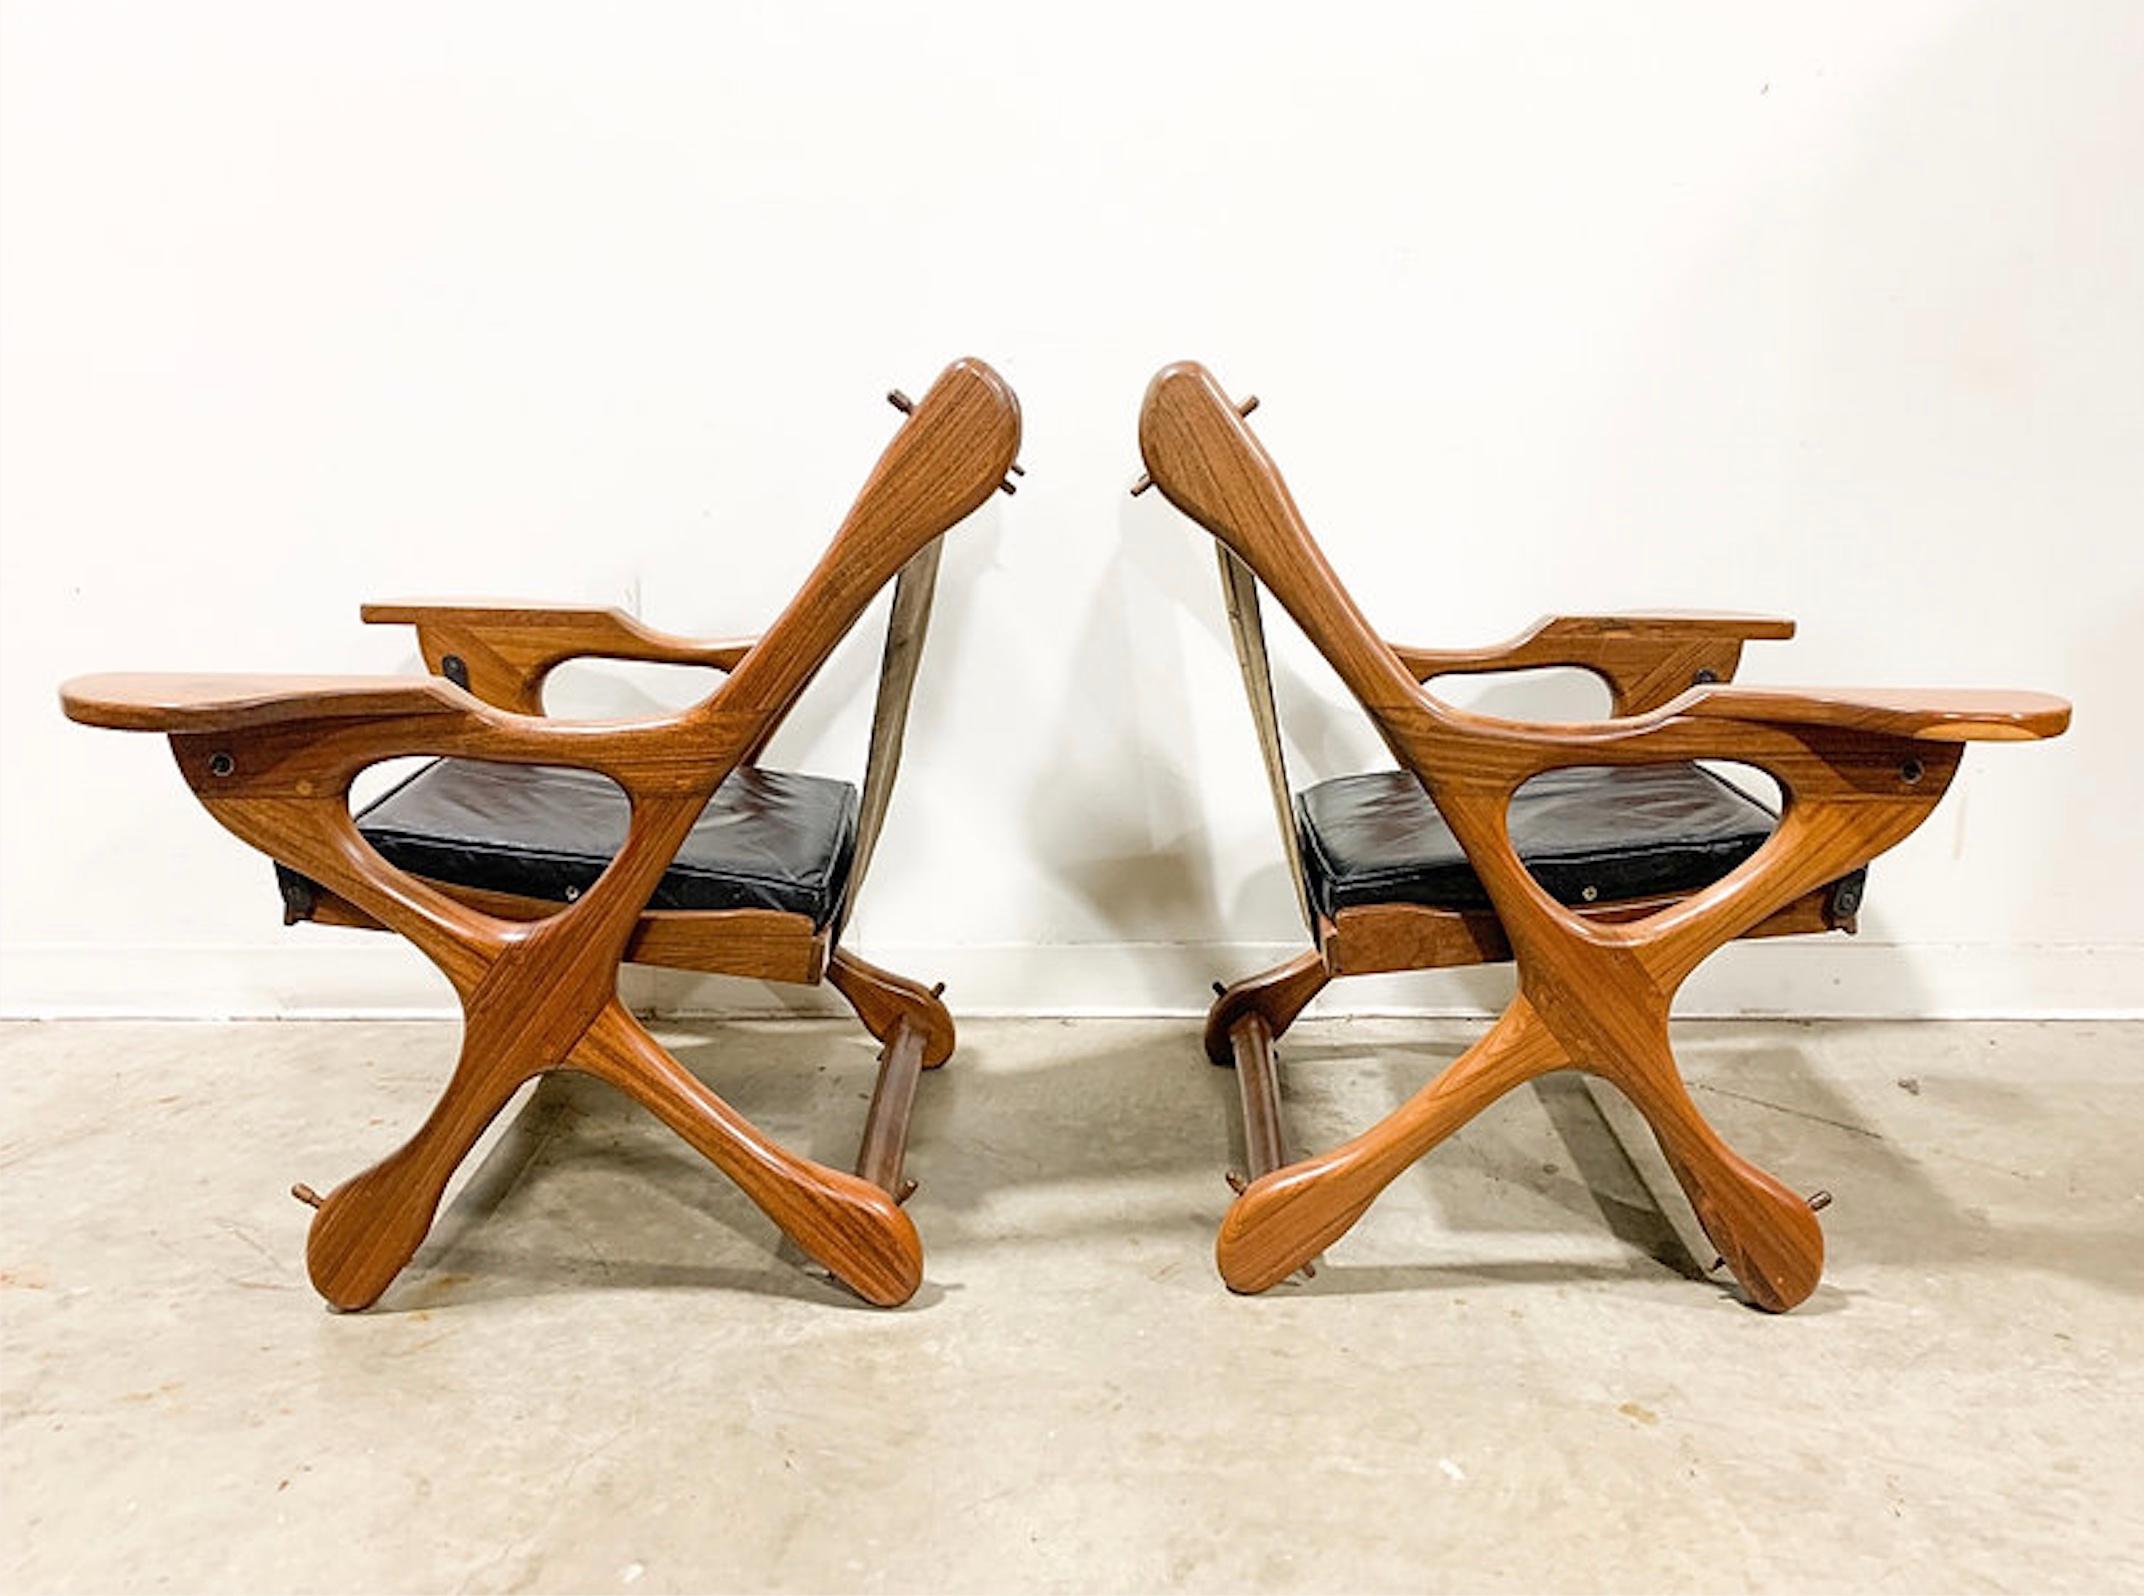 Rare Mexican Modern designs by Don S. Shoemaker featuring organic forms, pegged joinery, and beautiful leather work. The rosewood grain is gorgeous and the chairs are very comfortable allowing you to swing or find the best angle. The suspension